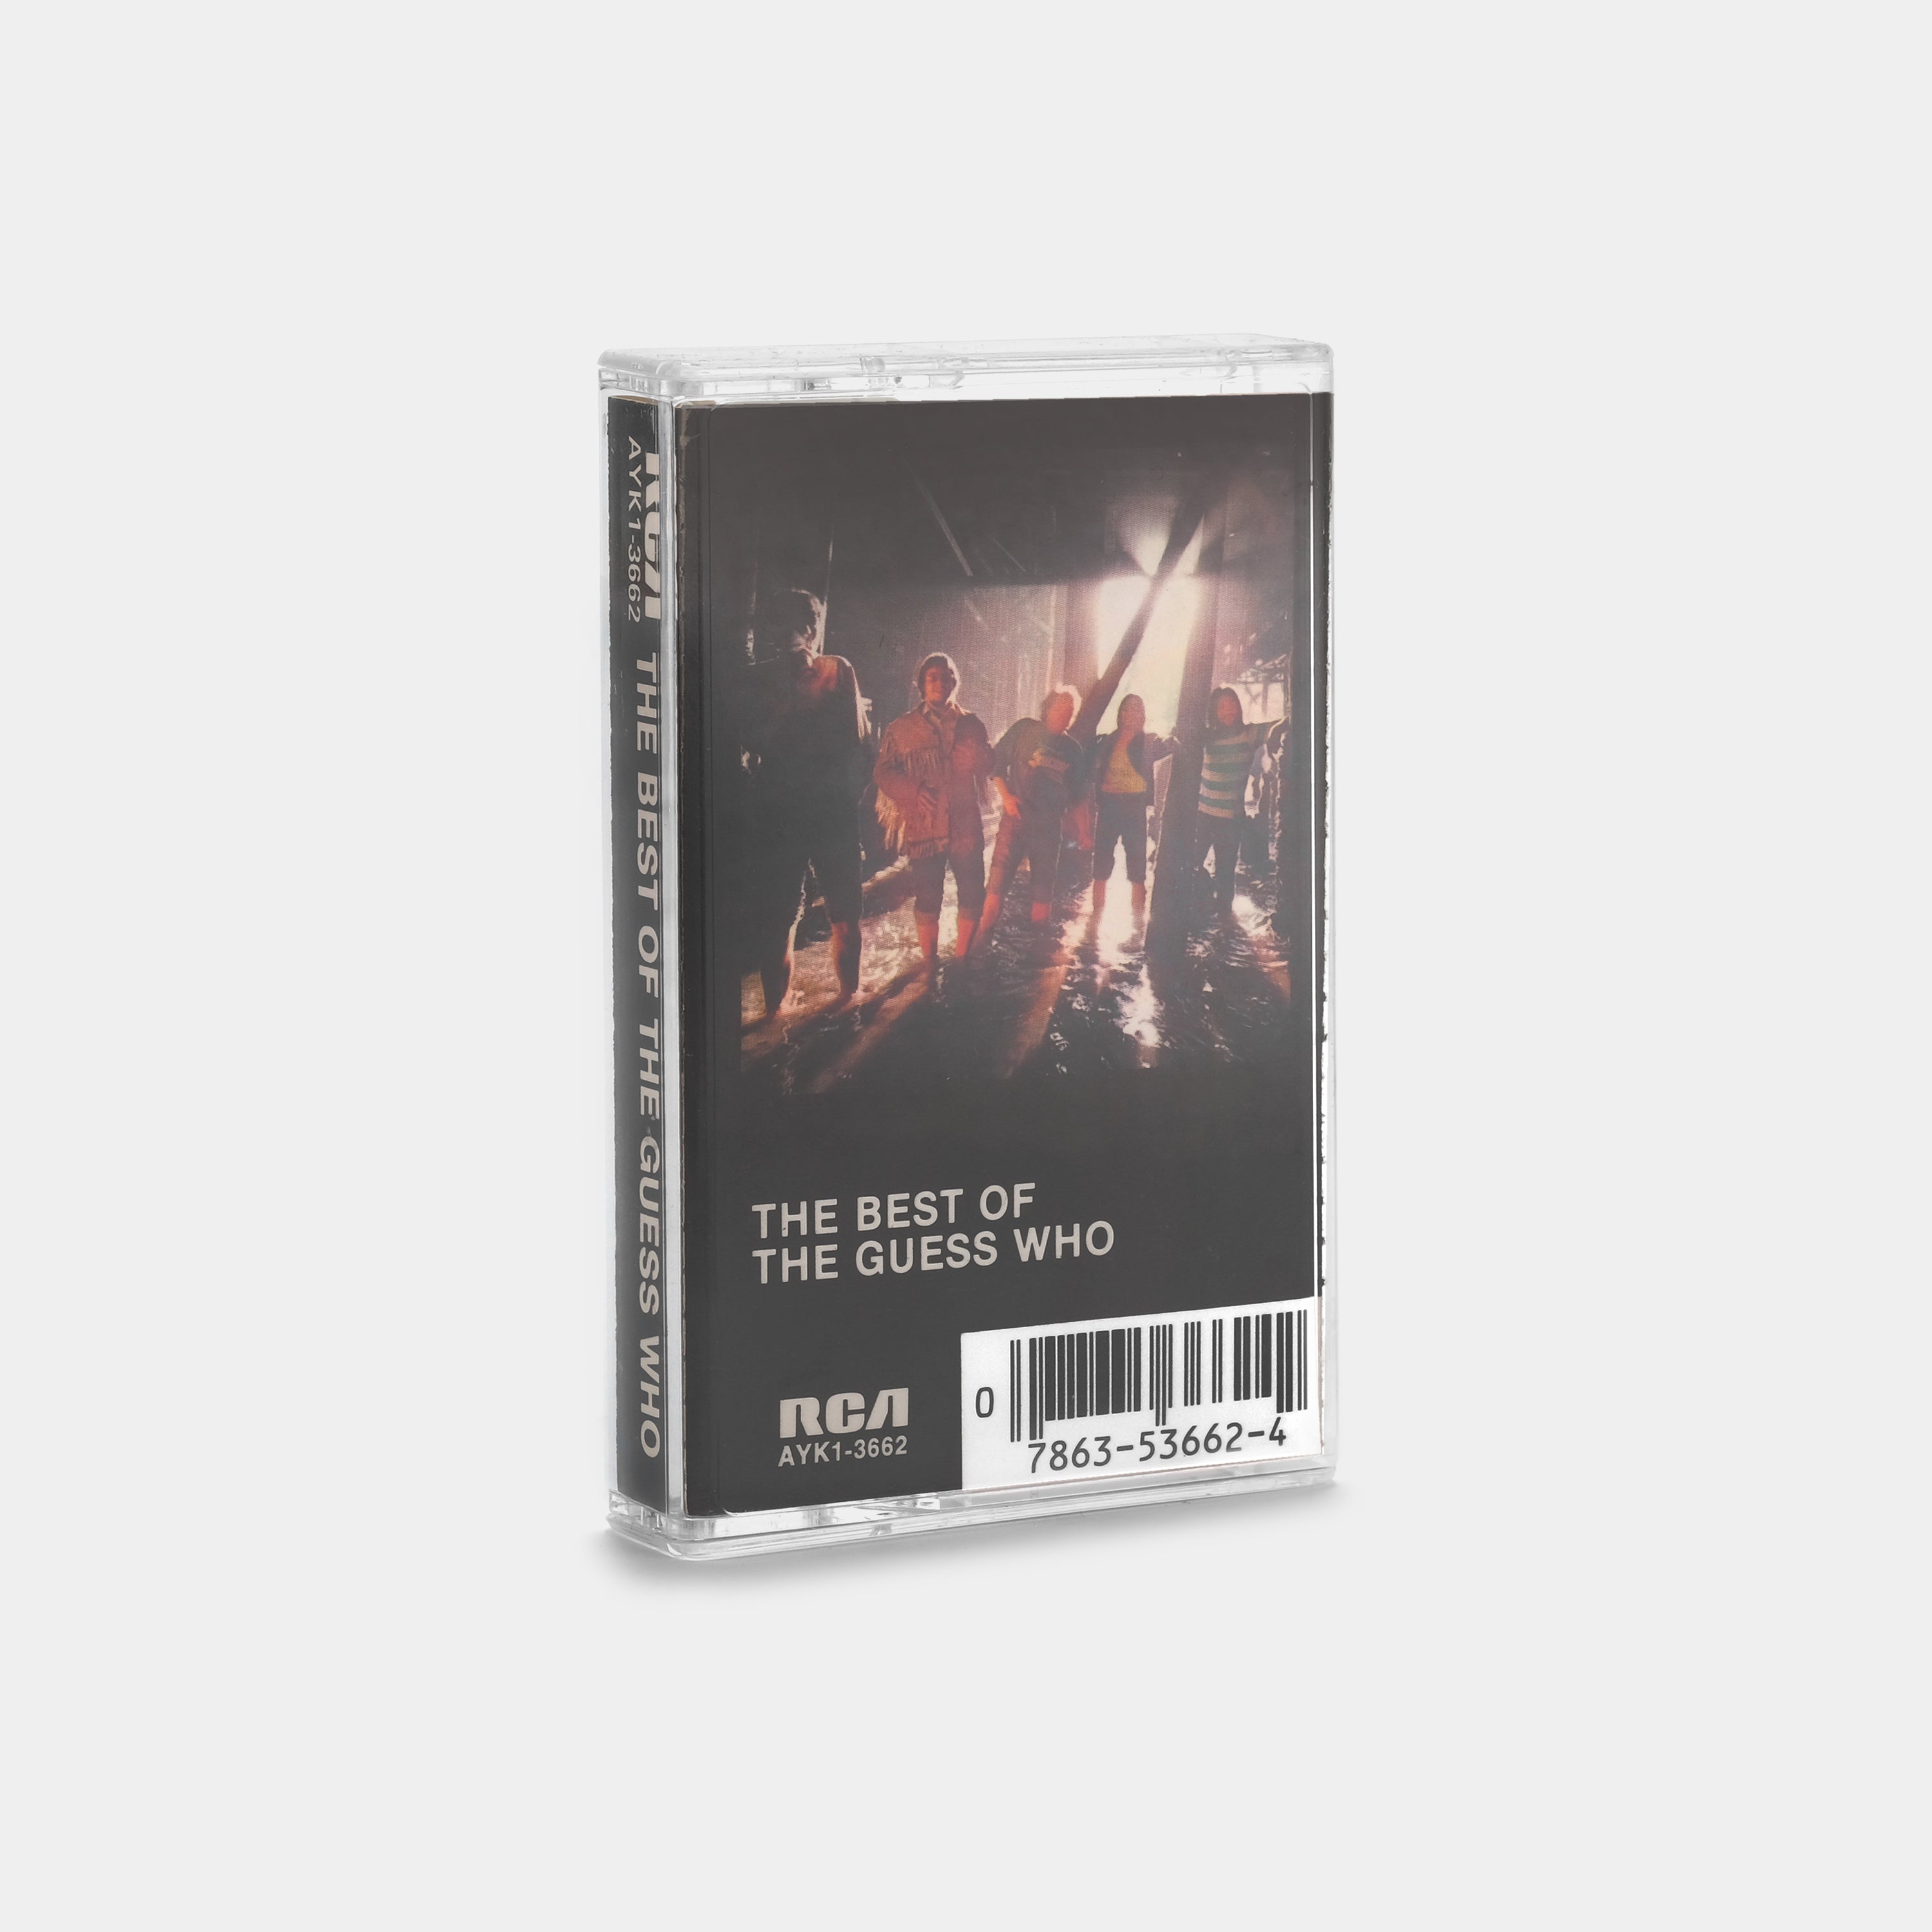 The Who - The Best Of The Who Cassette Tape